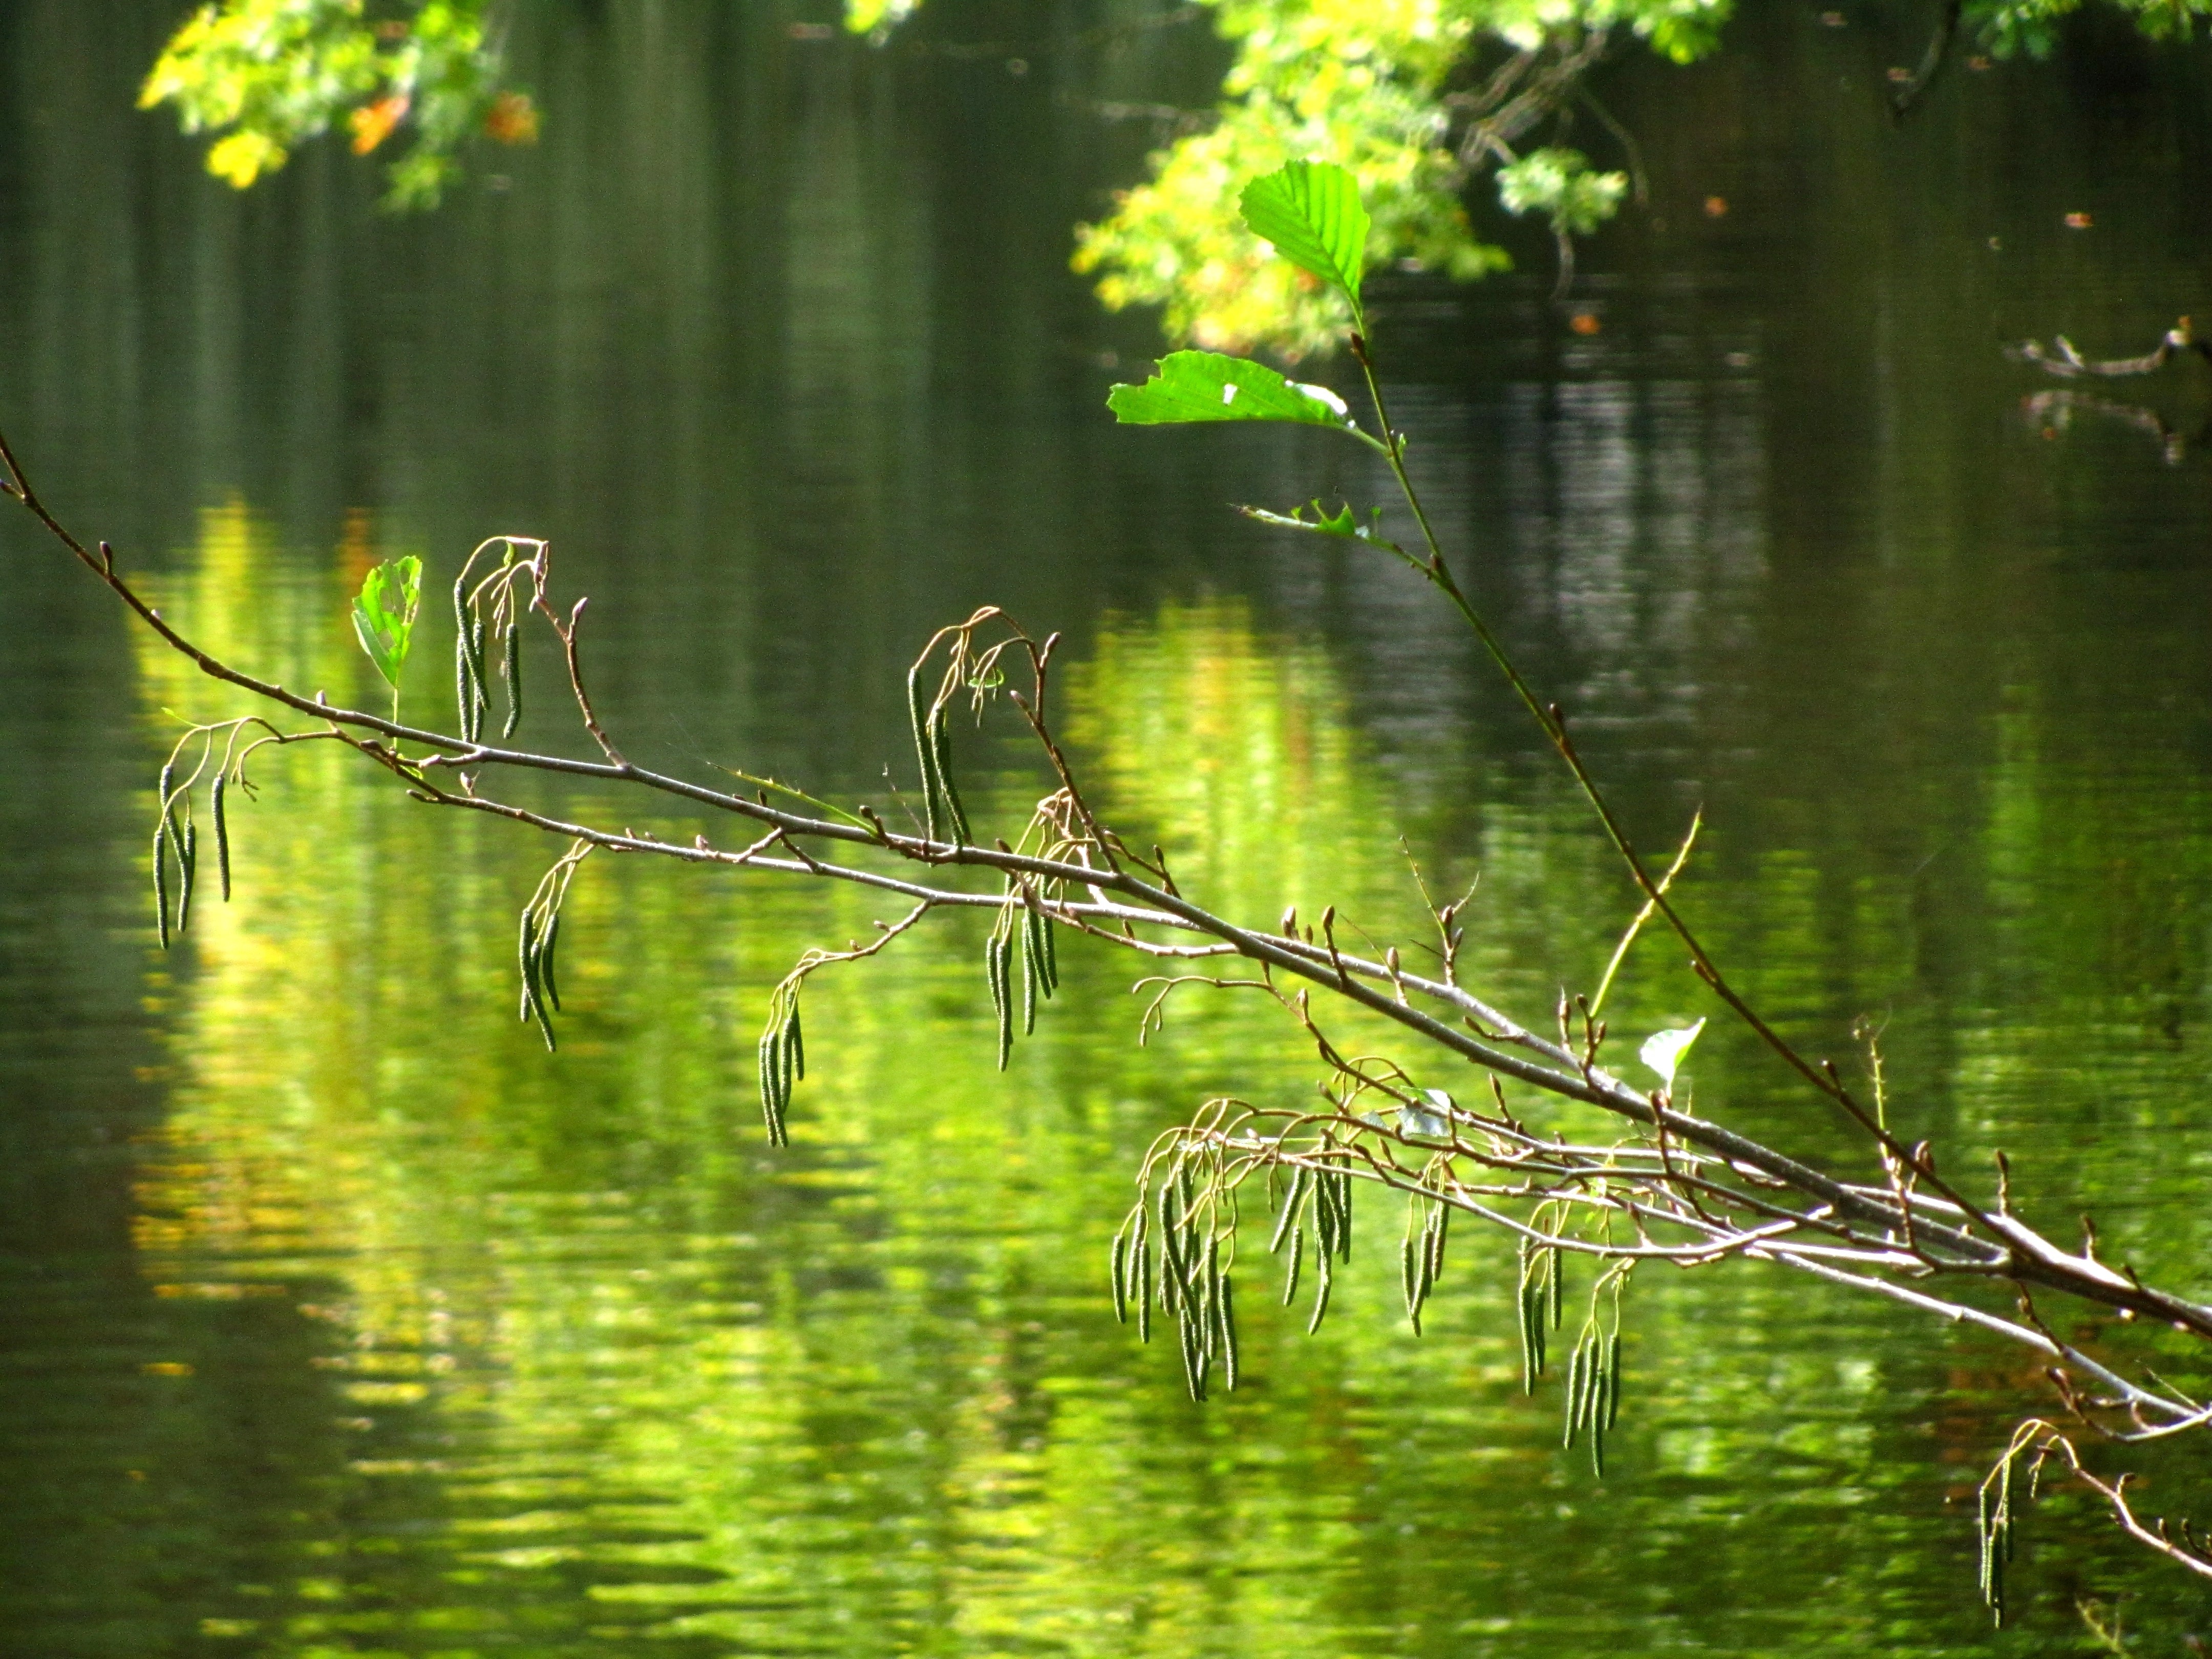 Lake, Mood, Branch, Forest, Nature, reflection, animals in the wild